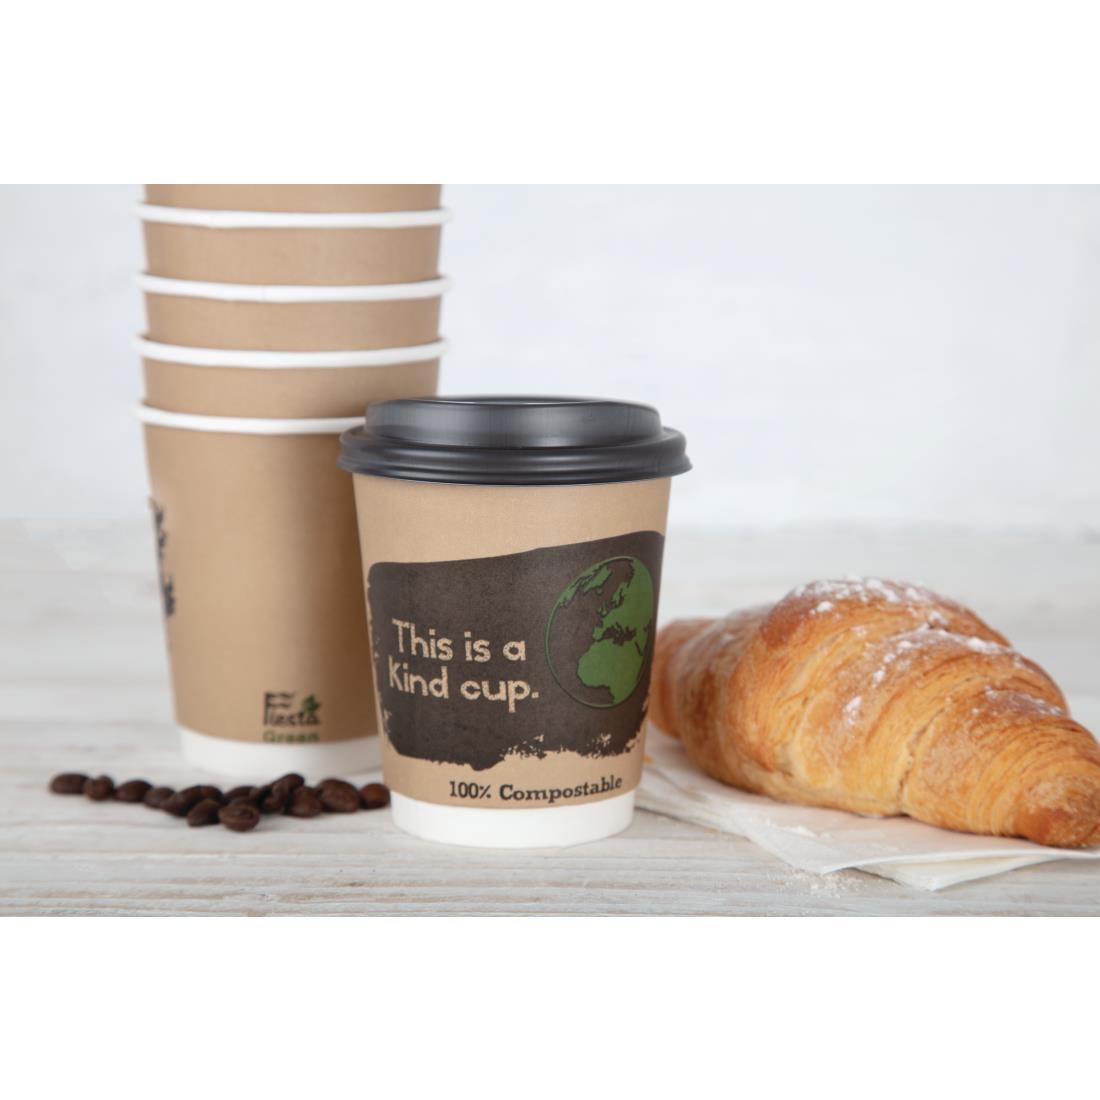 Fiesta Compostable Coffee Cups Double Wall 227ml / 8oz (Pack of 500) - DY985  - 6